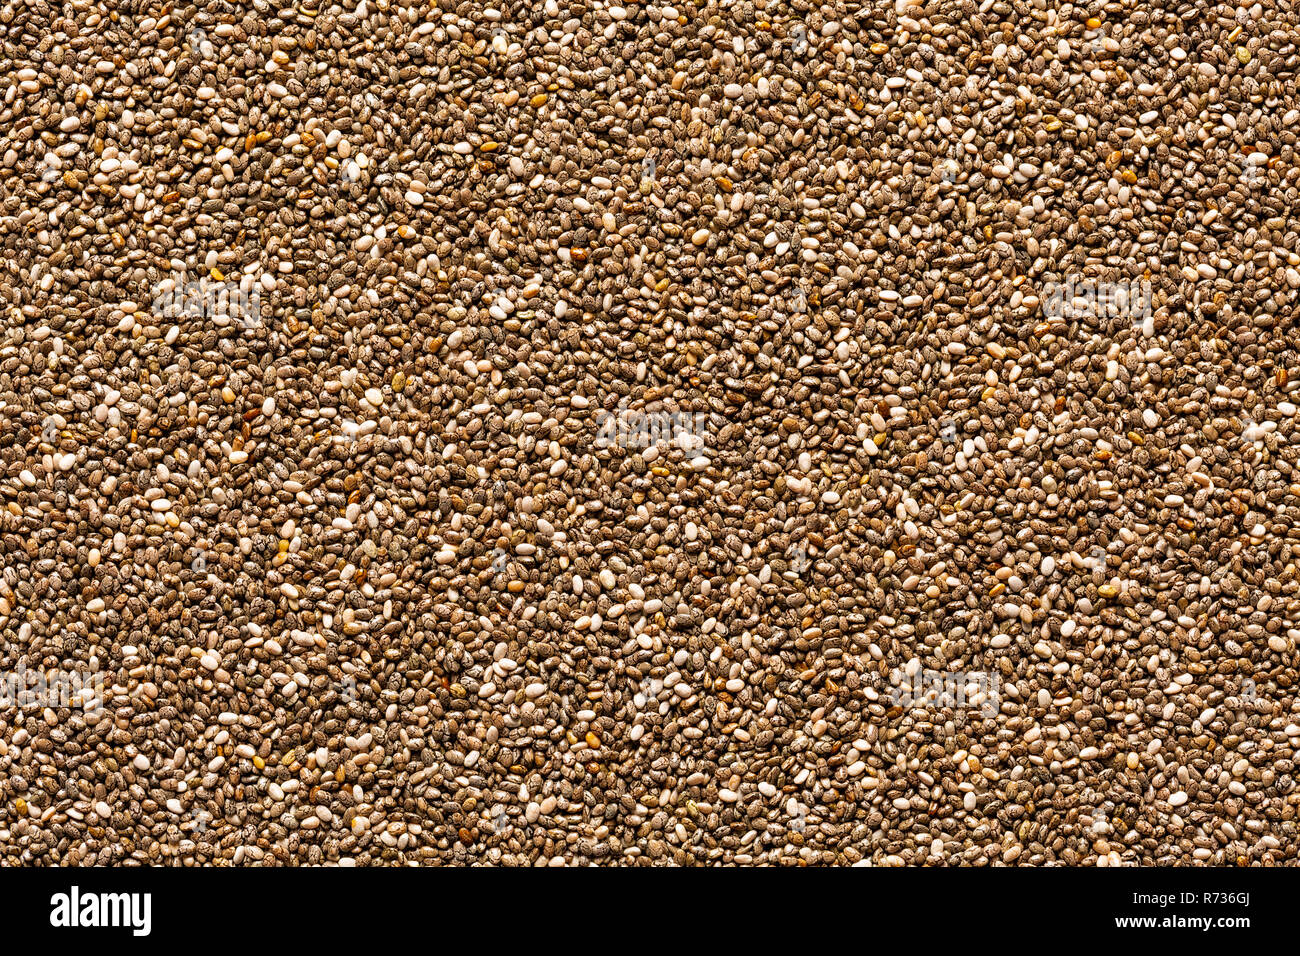 Chia seeds full frame image background, view directly from above Stock Photo